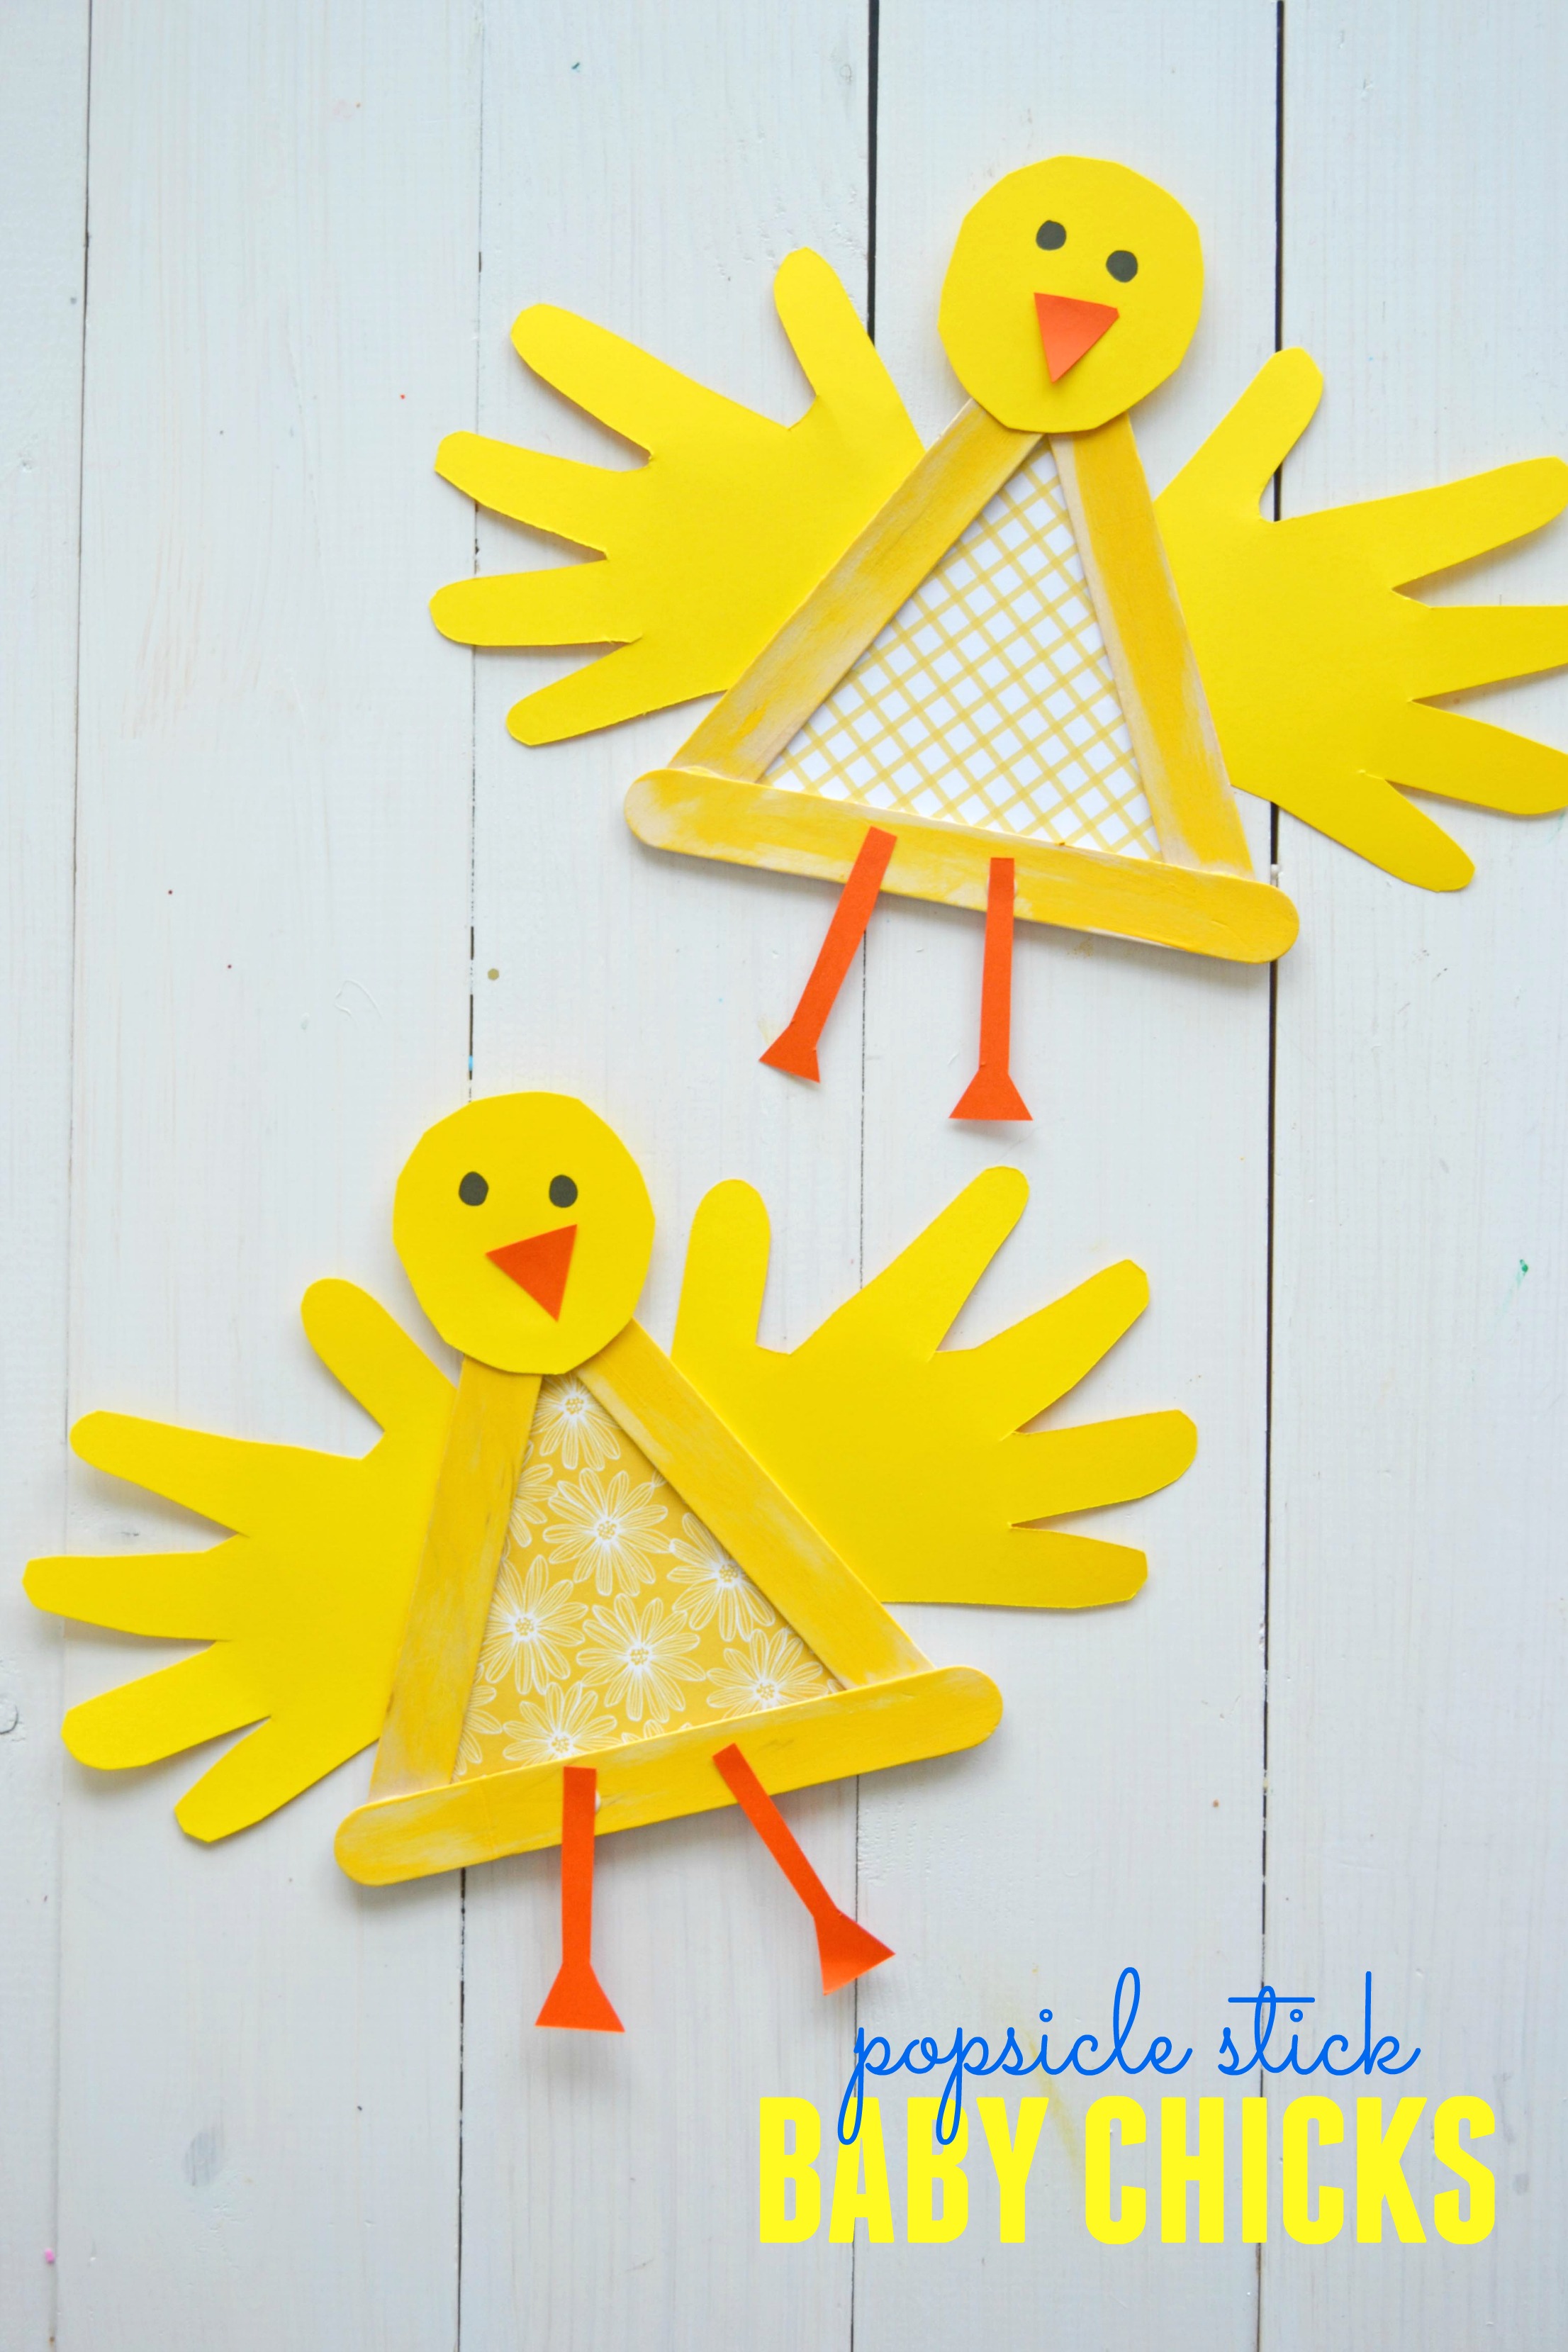 easy crafts for kids with popsicle sticks